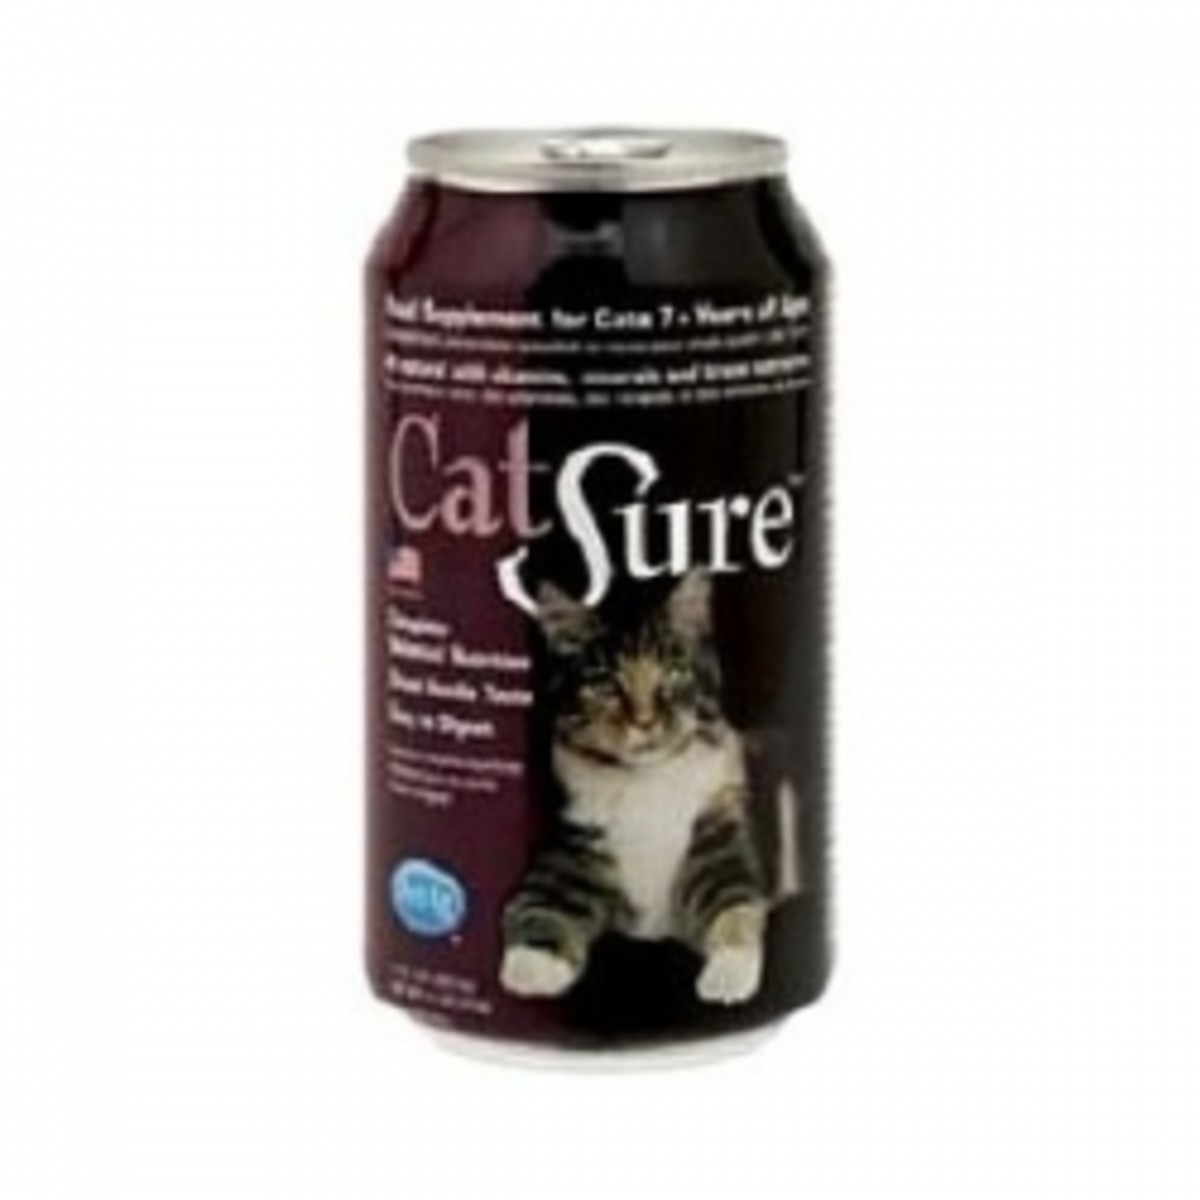 A Review of Cat Sure: Nutrition Supplement for Cats